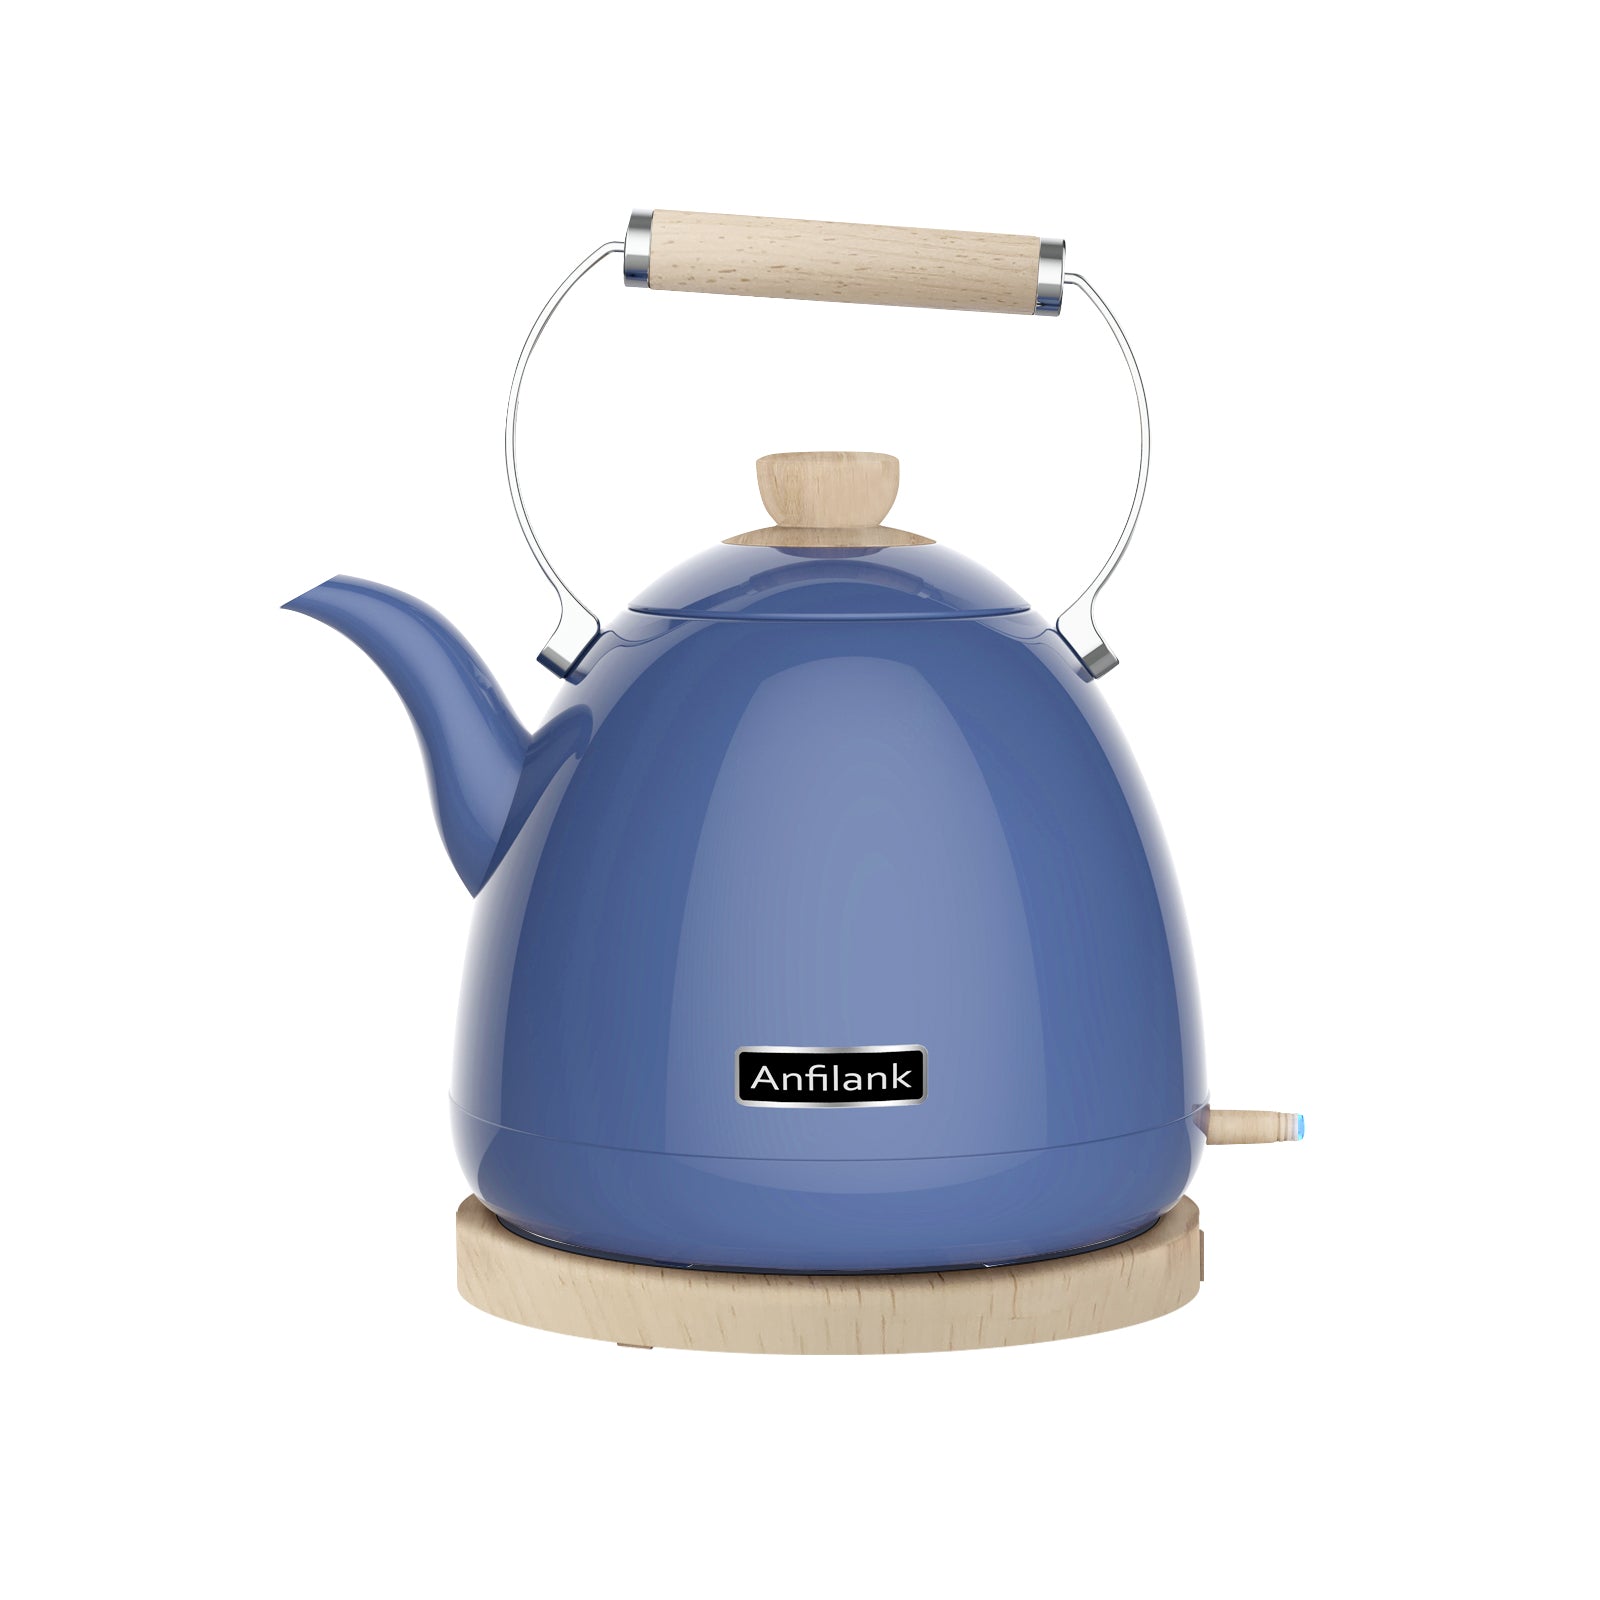 Anfilank 1.7L Cordless Electric Kettle, Stainless Steel Tea Kettle with Water window And LED Light, Auto Shut-off, JK-150